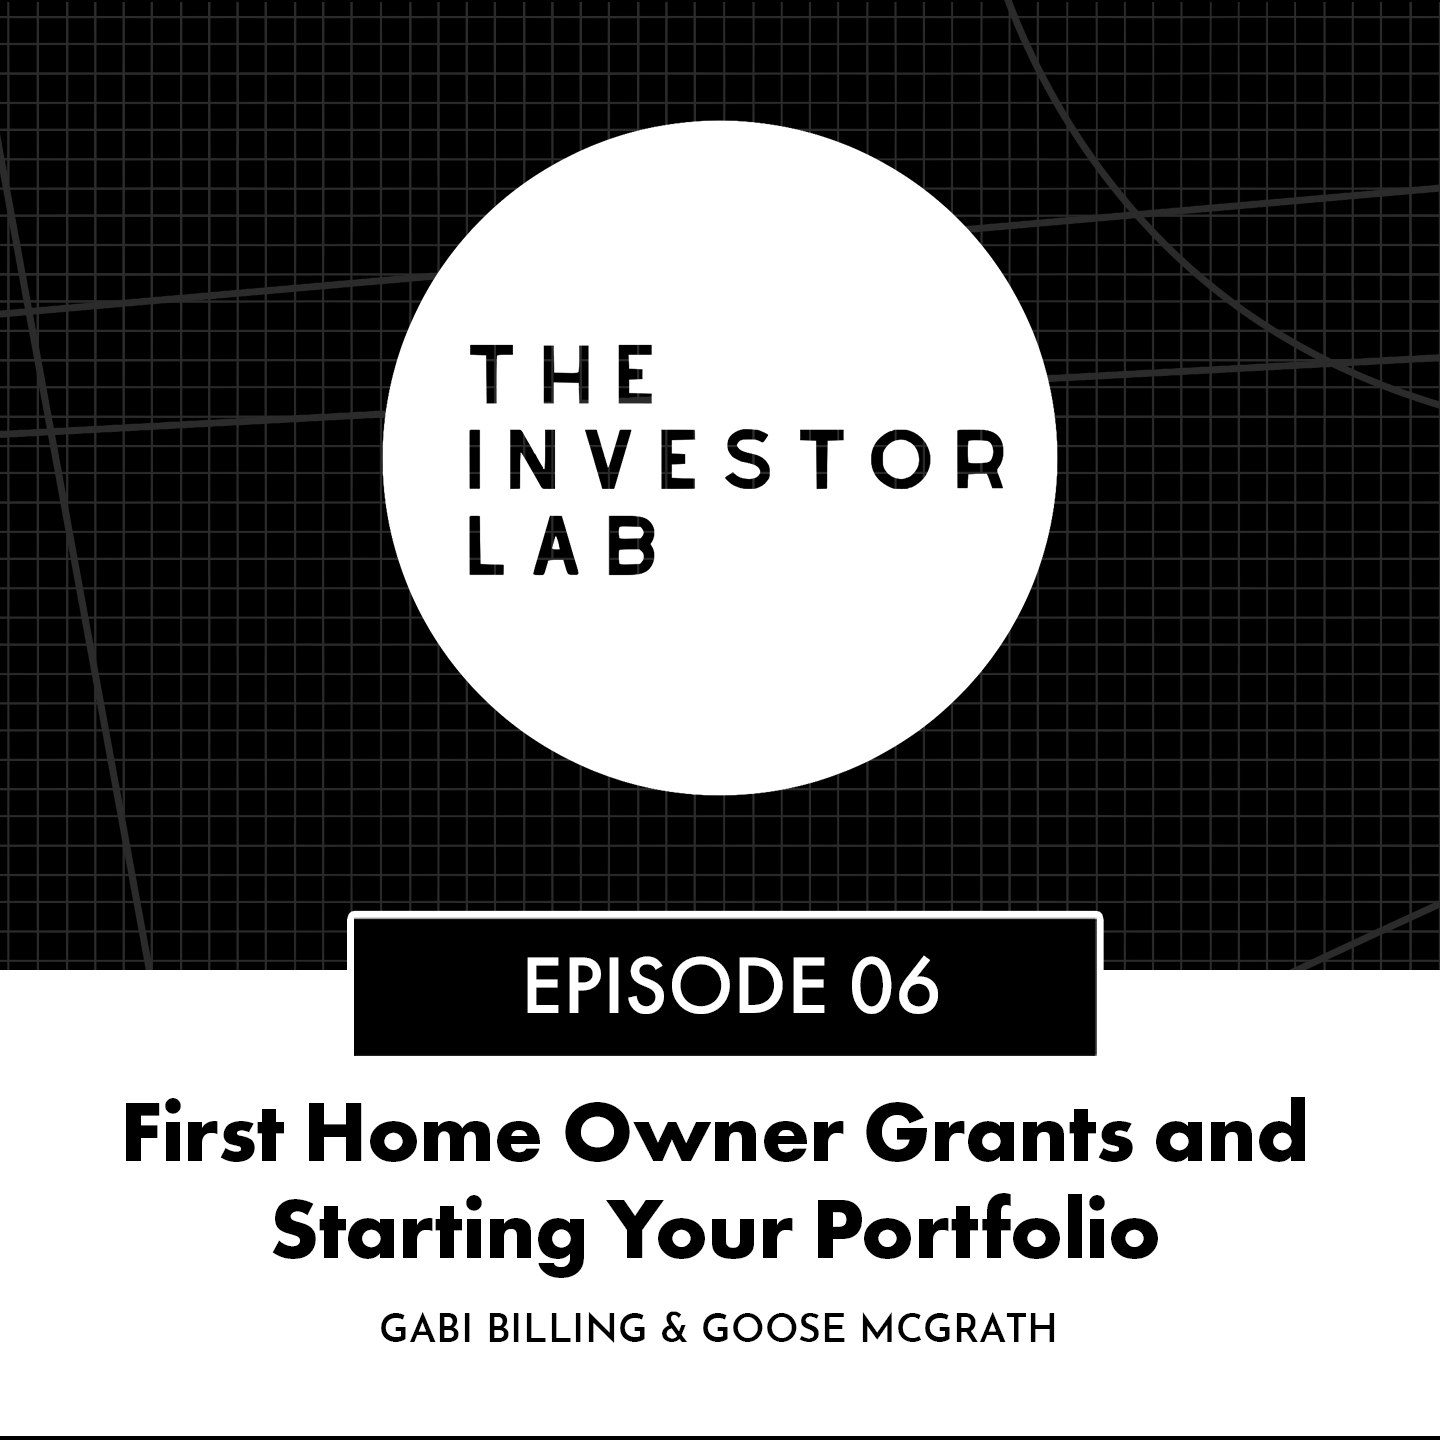 First Home Owner Grants and Starting Your Portfolio